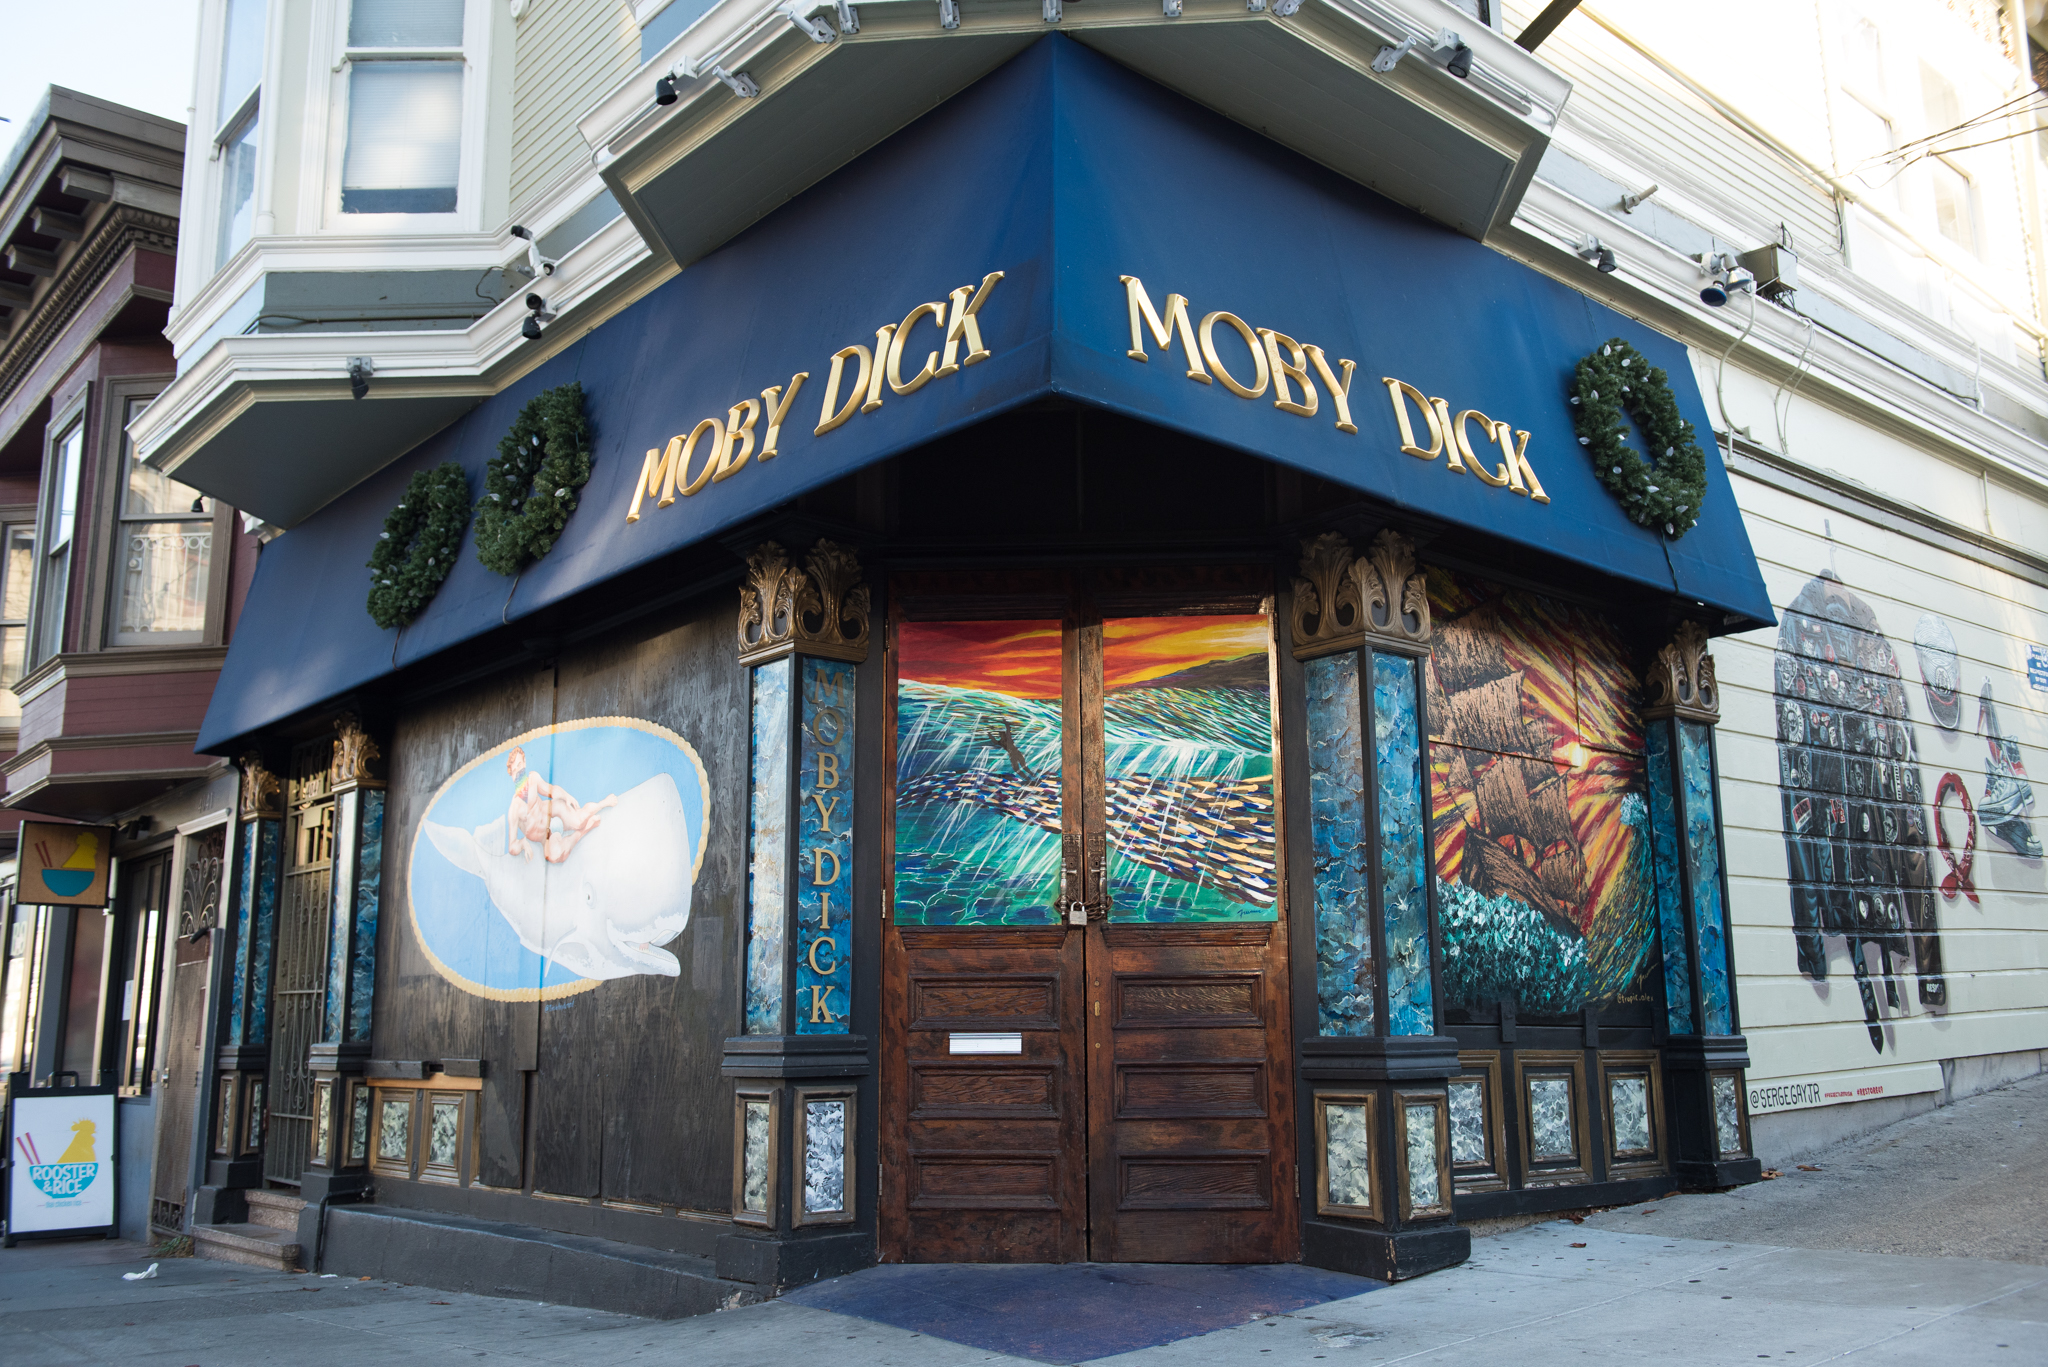 Moby Dick, one of the oldest gay bars in SF, faces uncertain future